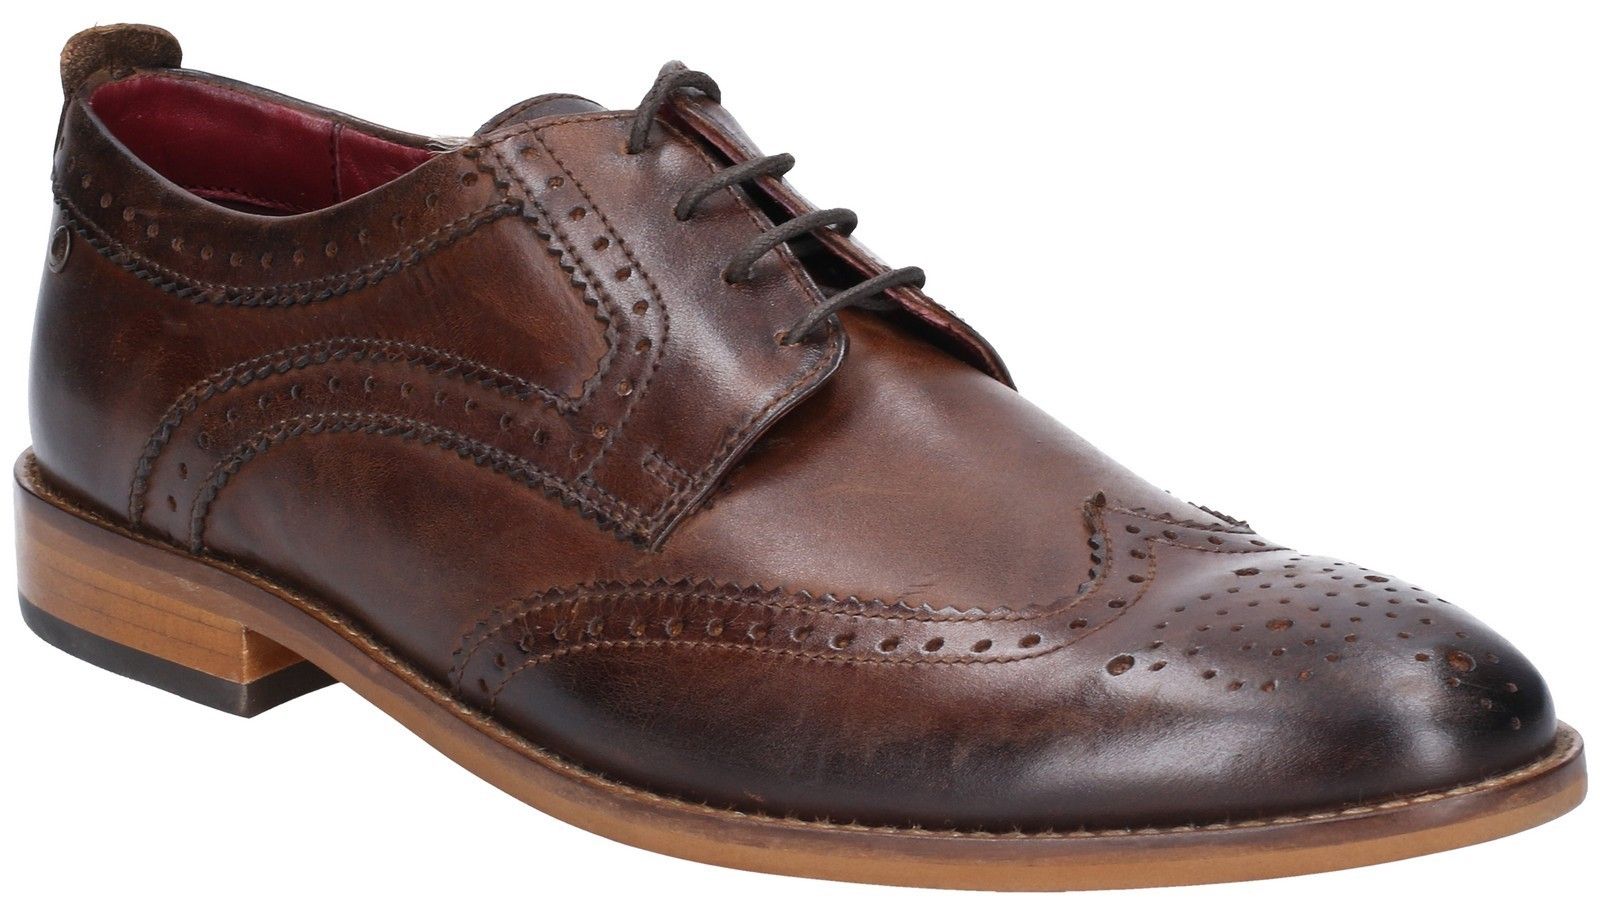 A fierce shoe, made with a durable slim line resin sole and offering a generous heel. From the Base London Spotlight collection, this sharp wing-tip brogue is made from the highest quality leathers and is perfect for all formal occasions. High quality leather upper. 
Slim line Resin sole. 
Brogue detailing.